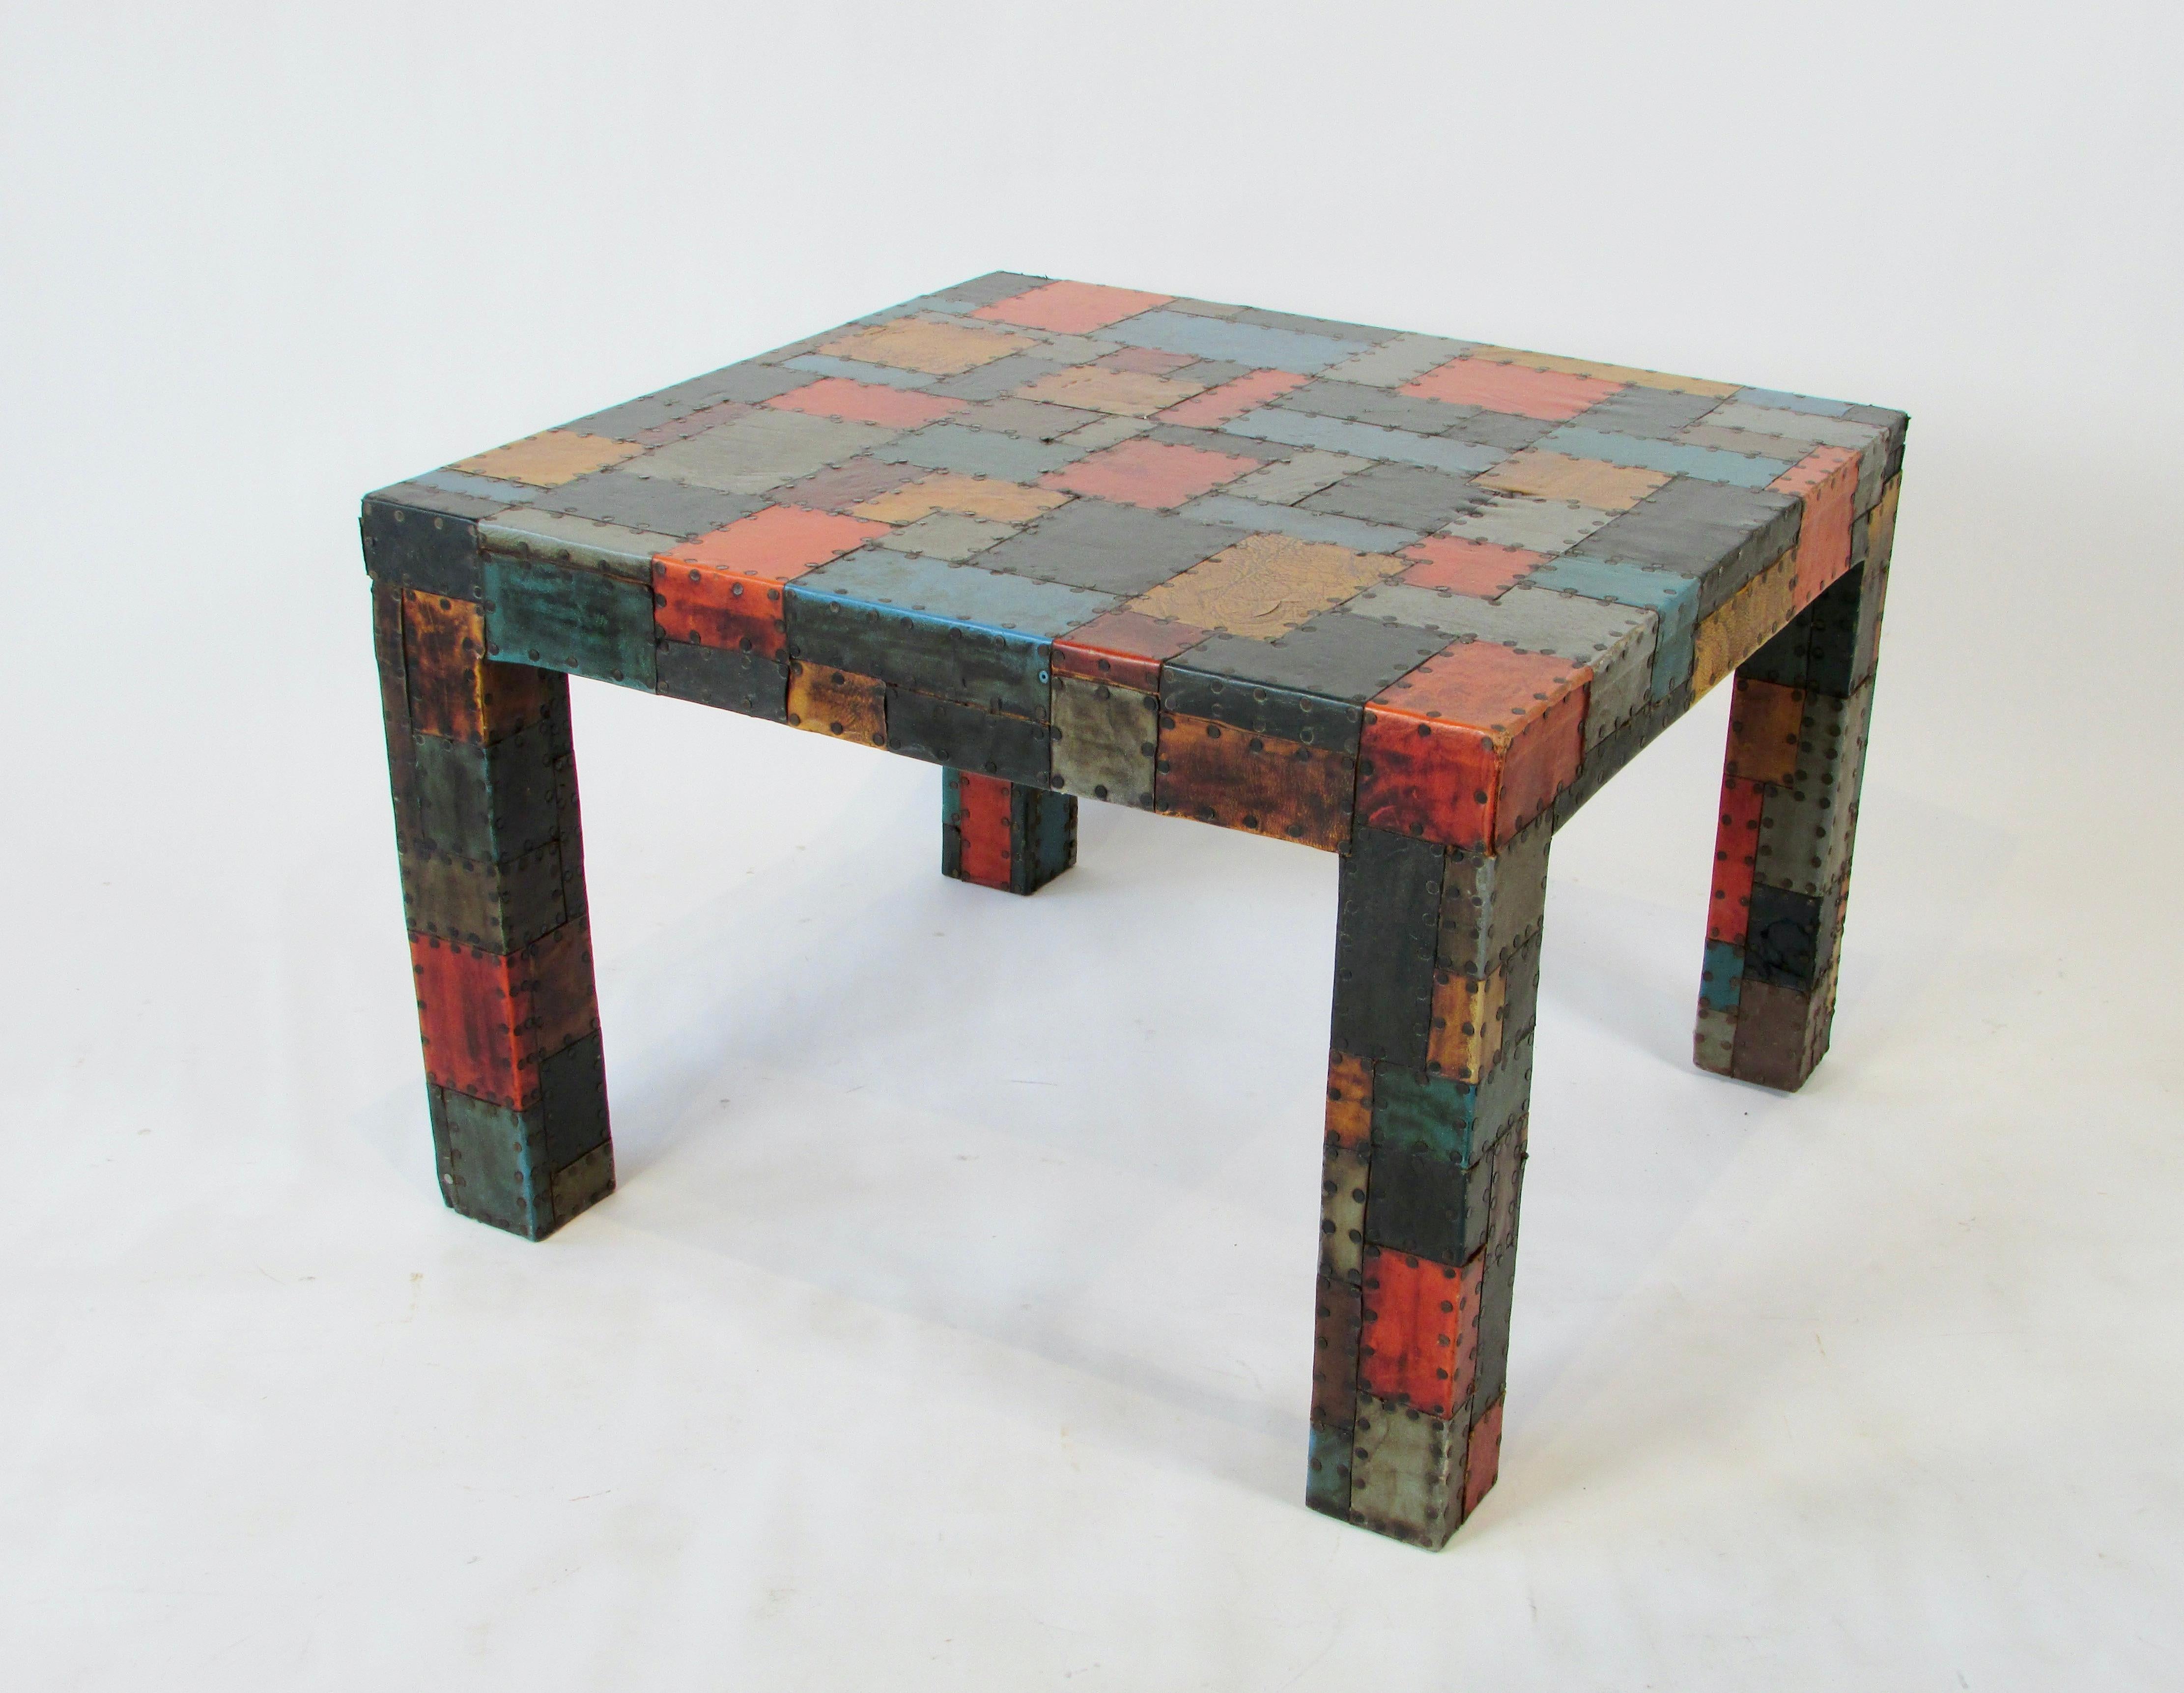 American Organic 1960s Folk Art Table with Hammered Nail Multi Color Leather Patchwork For Sale